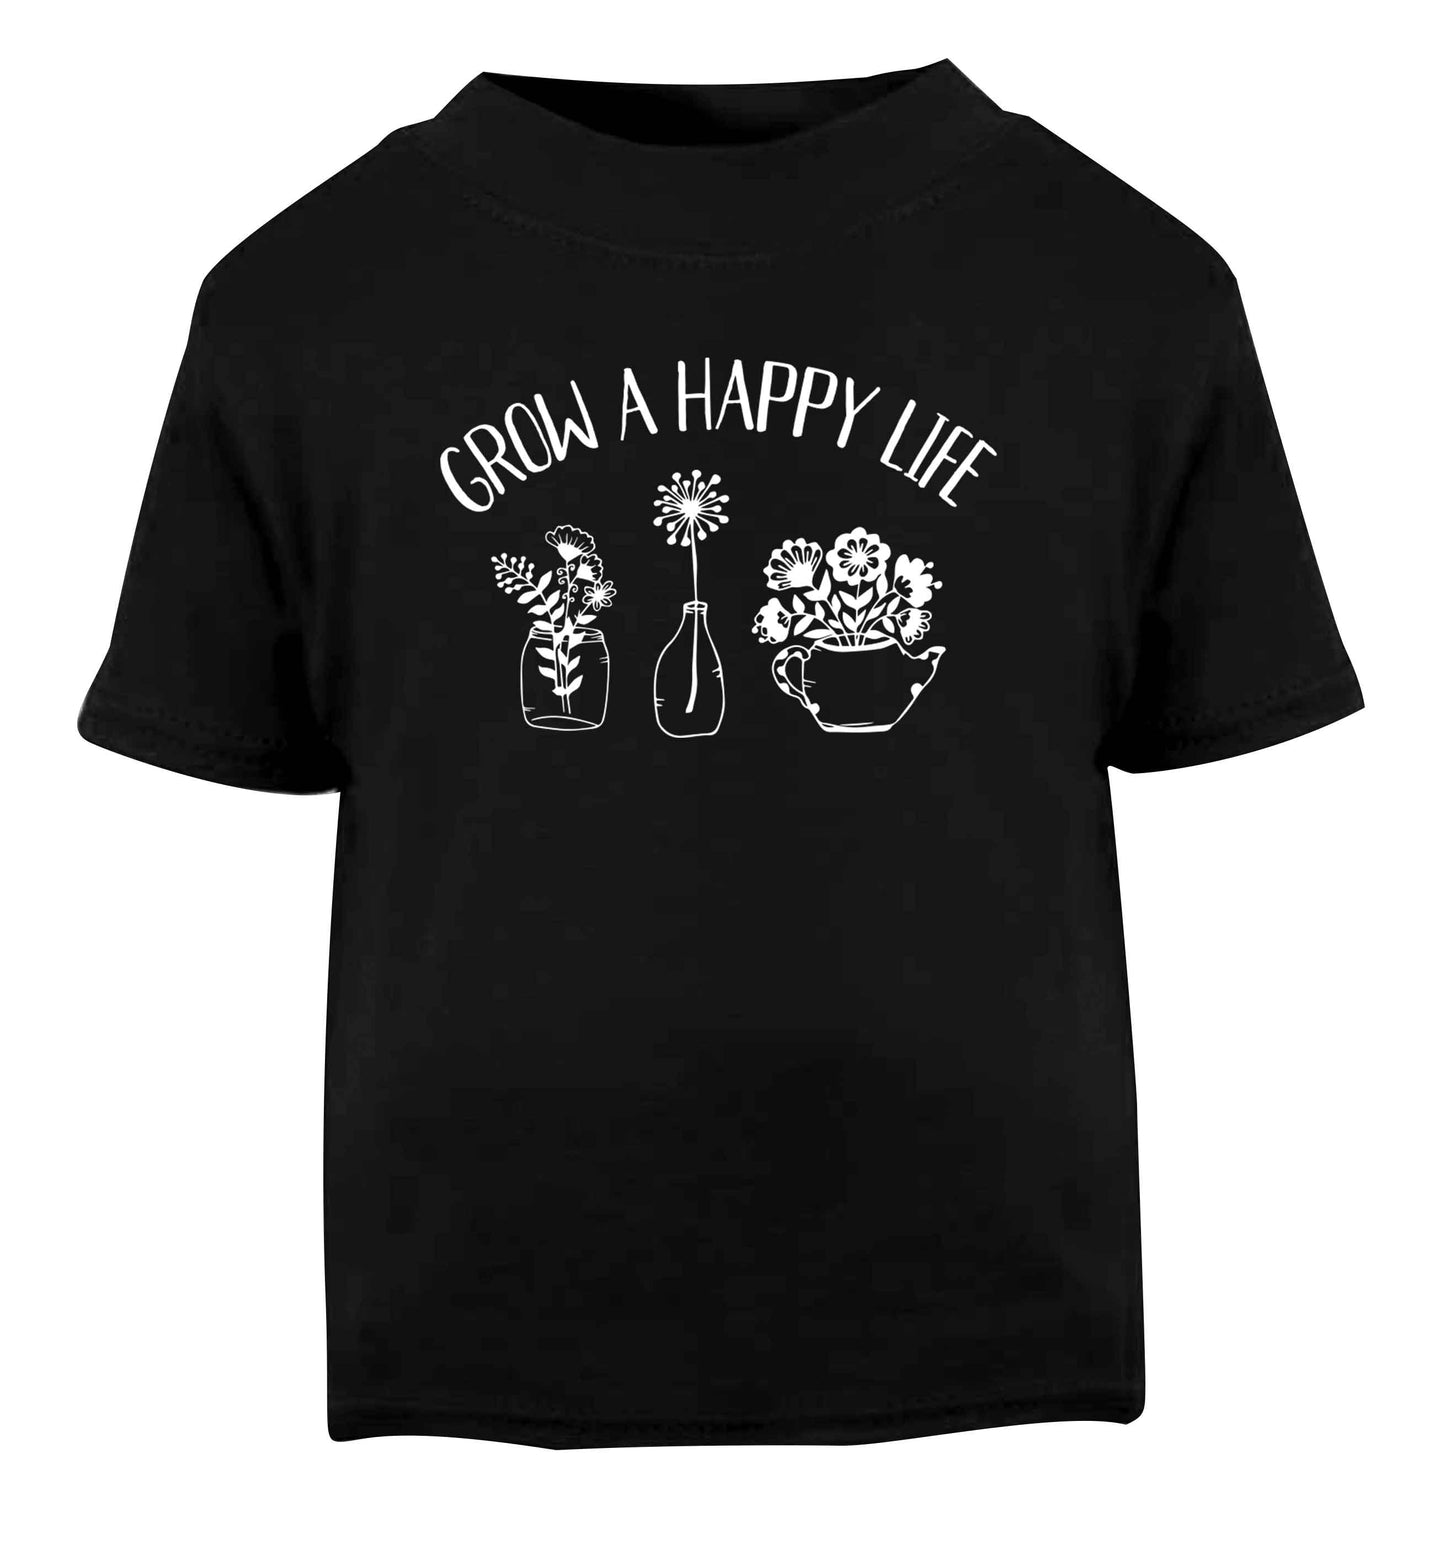 Grow a happy life Black Baby Toddler Tshirt 2 years